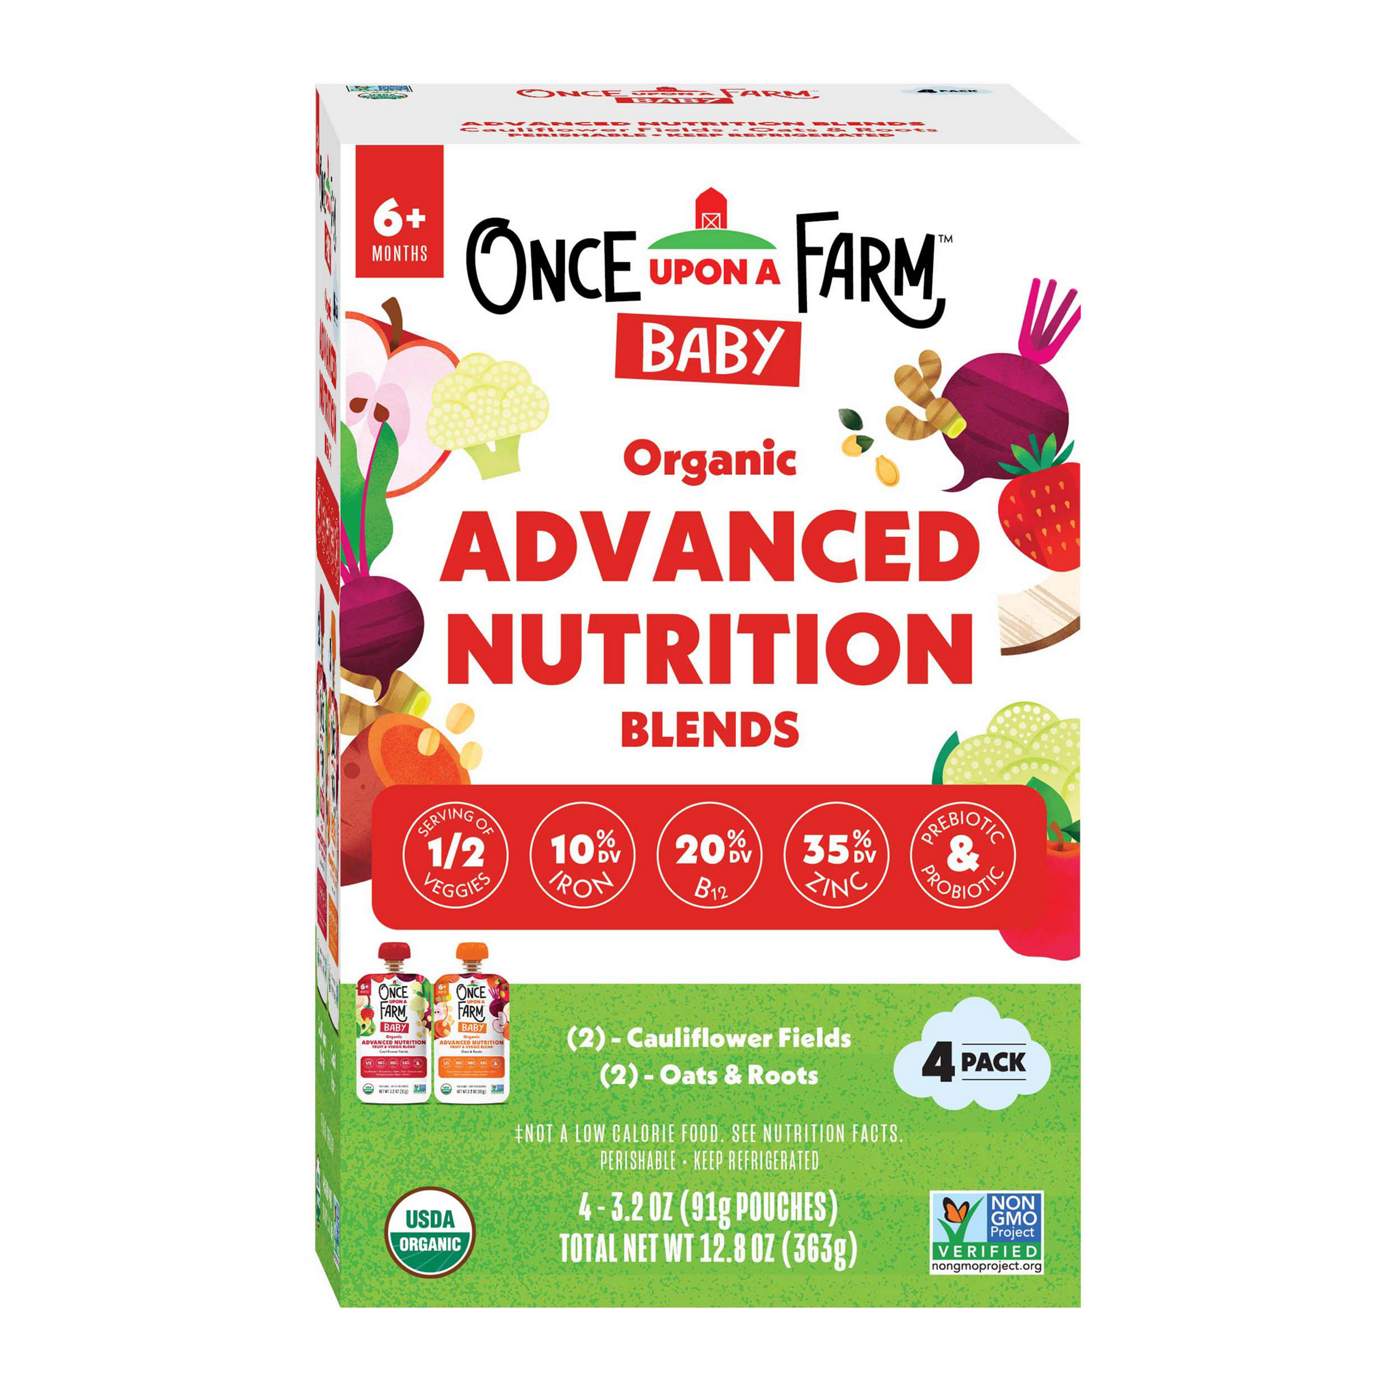 Once Upon a Farm Organic Advanced Nutrition Blends - Cauliflower Fields; image 1 of 2